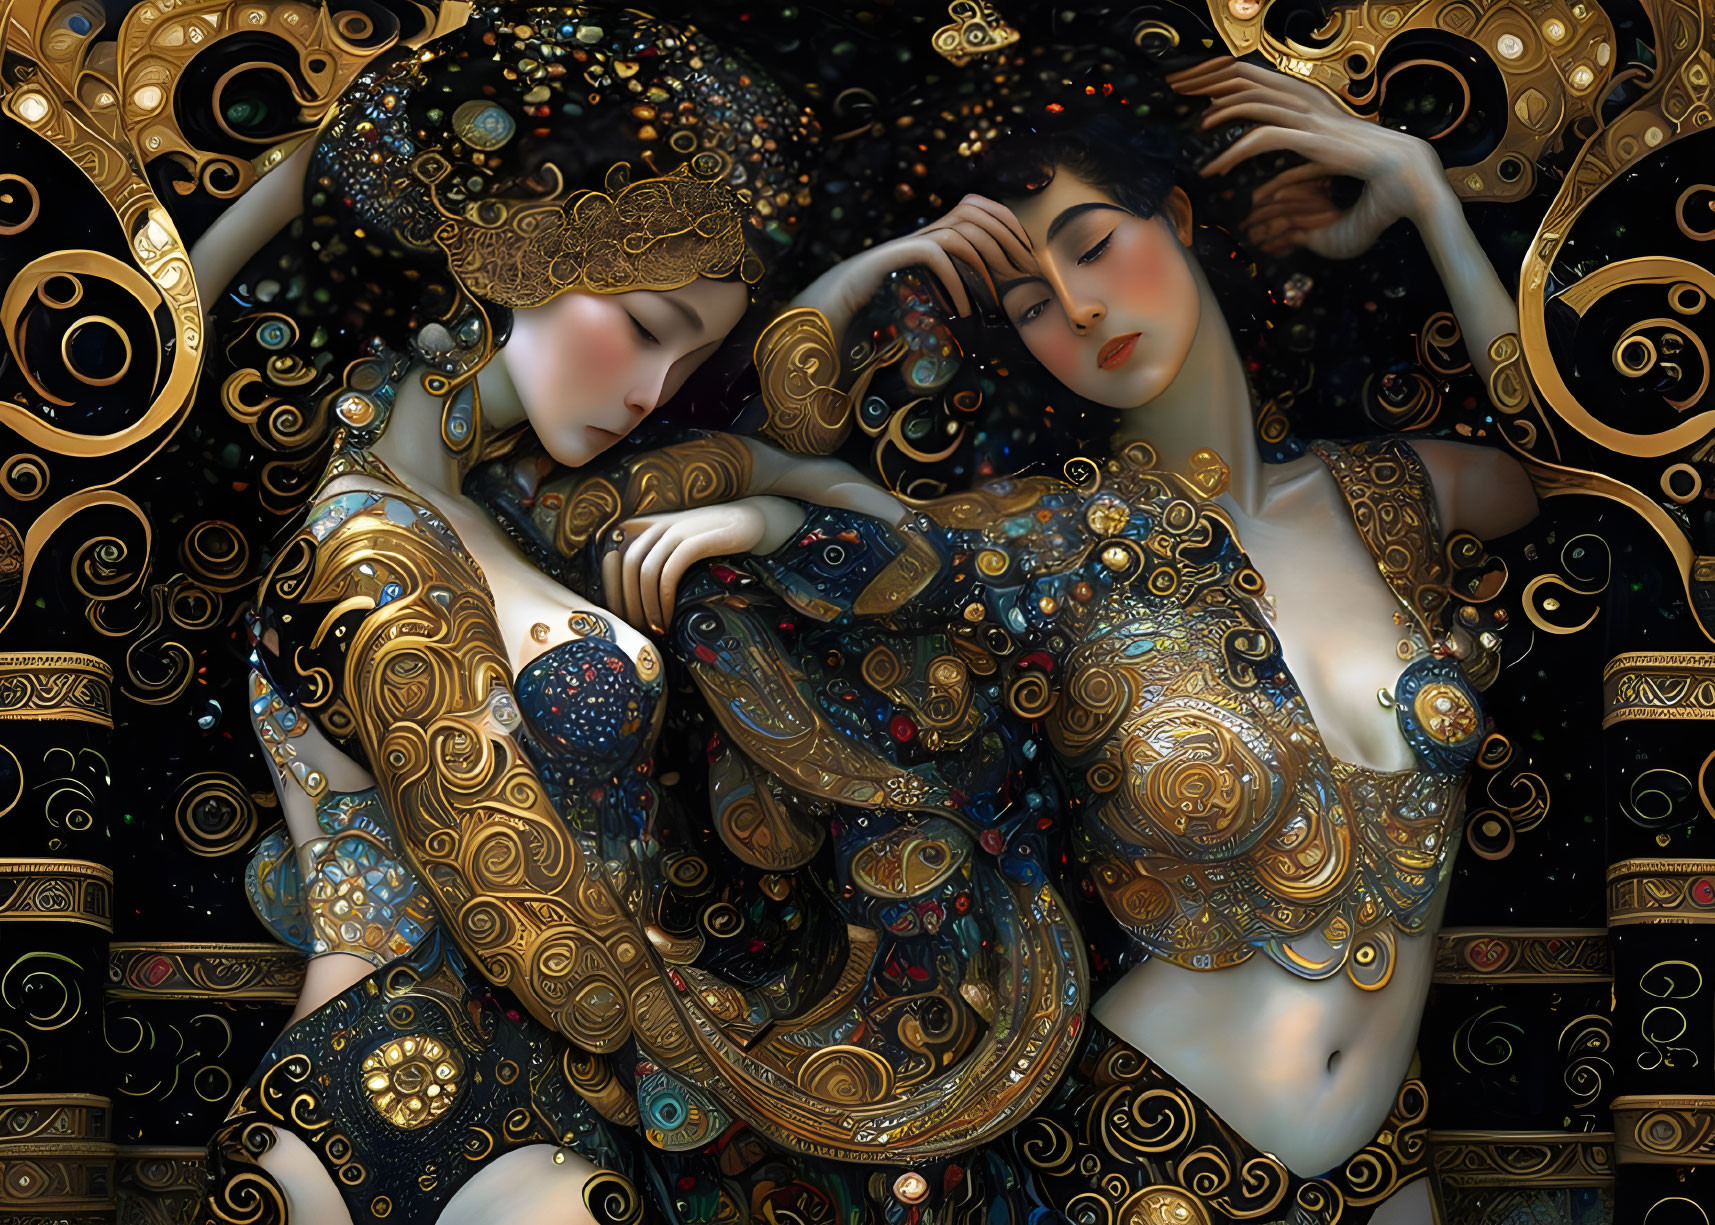 Stylized ornate female figures in gold-patterned clothing against intricate background